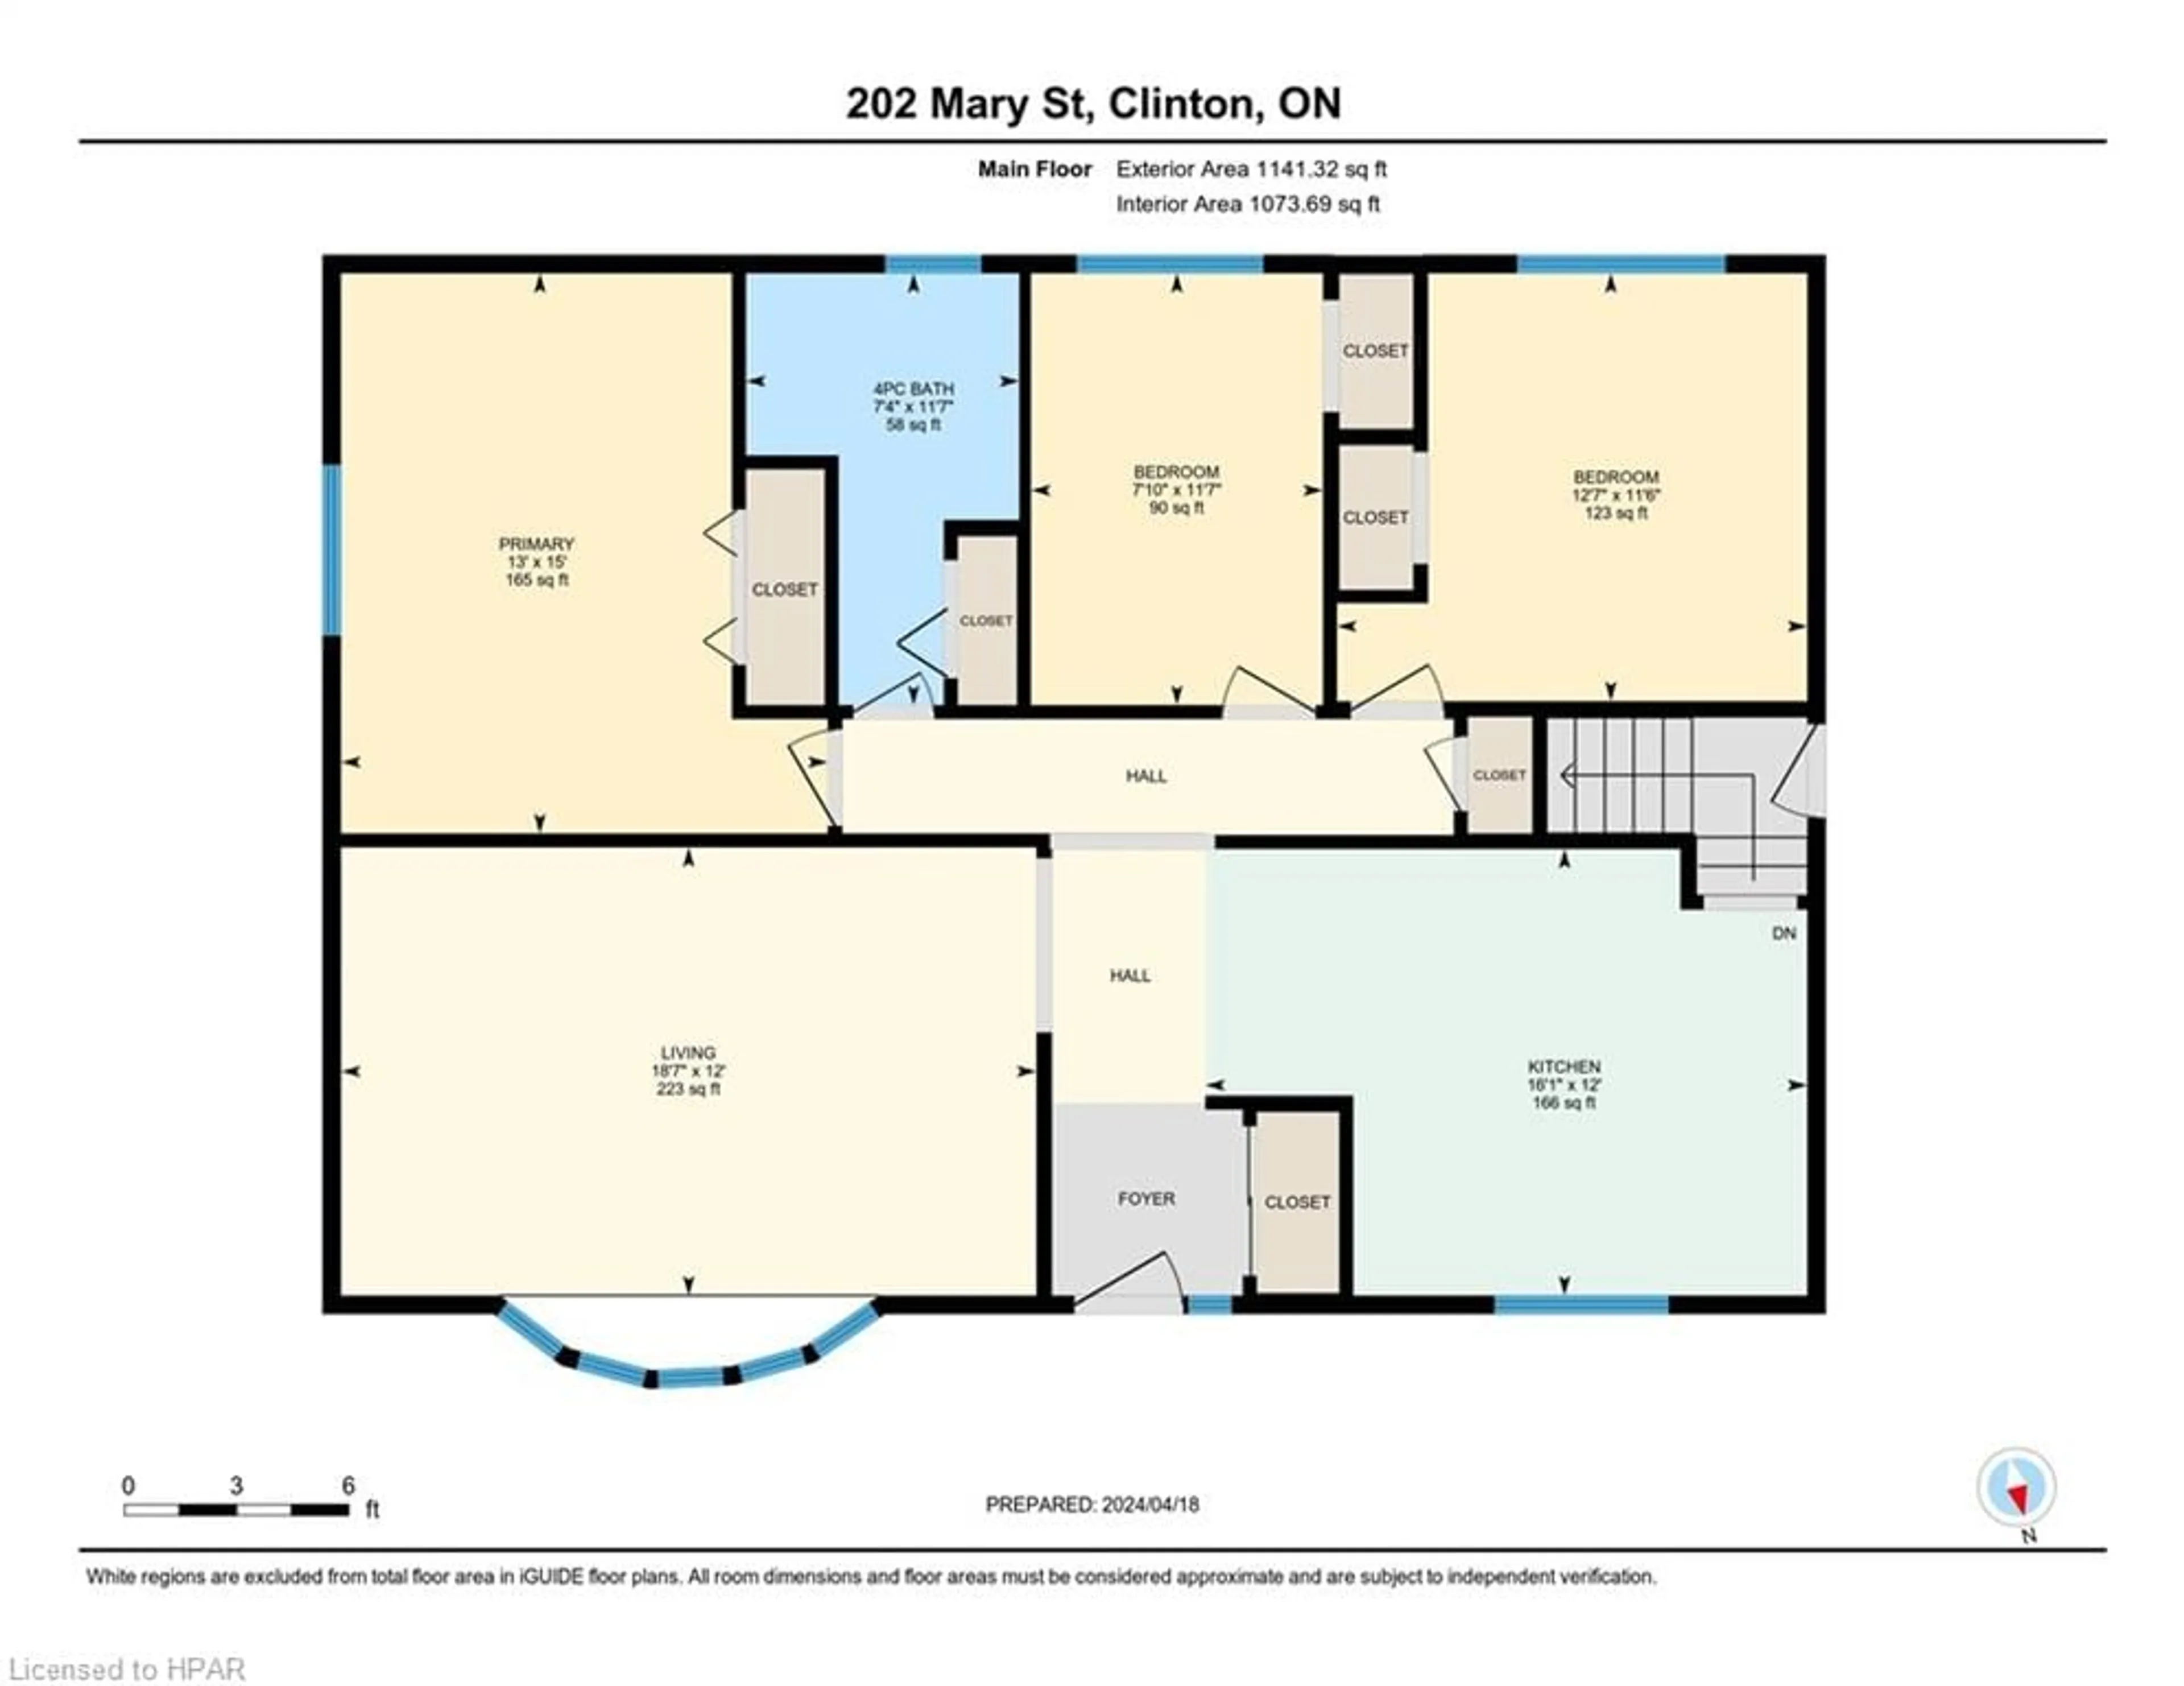 Floor plan for 202 Mary St, Clinton Ontario N0M 1L0